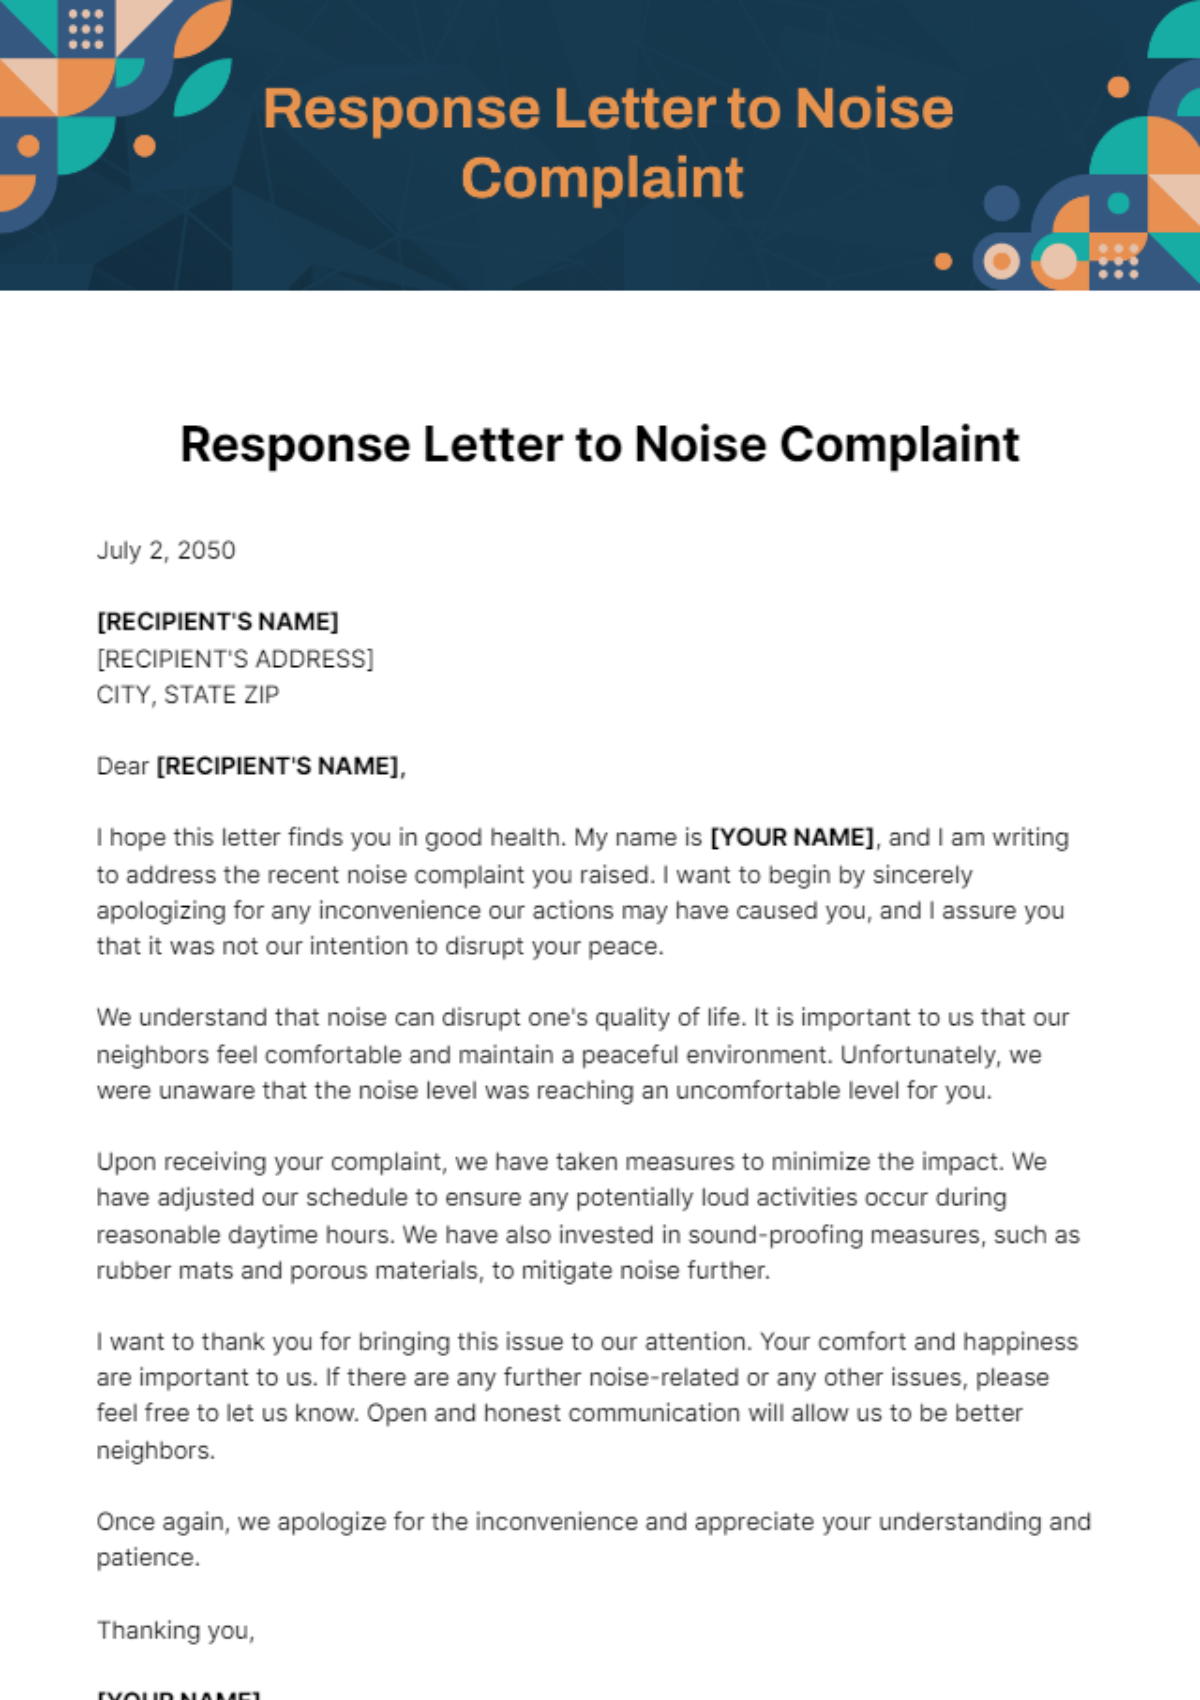 Response Letter to Noise Complaint Template